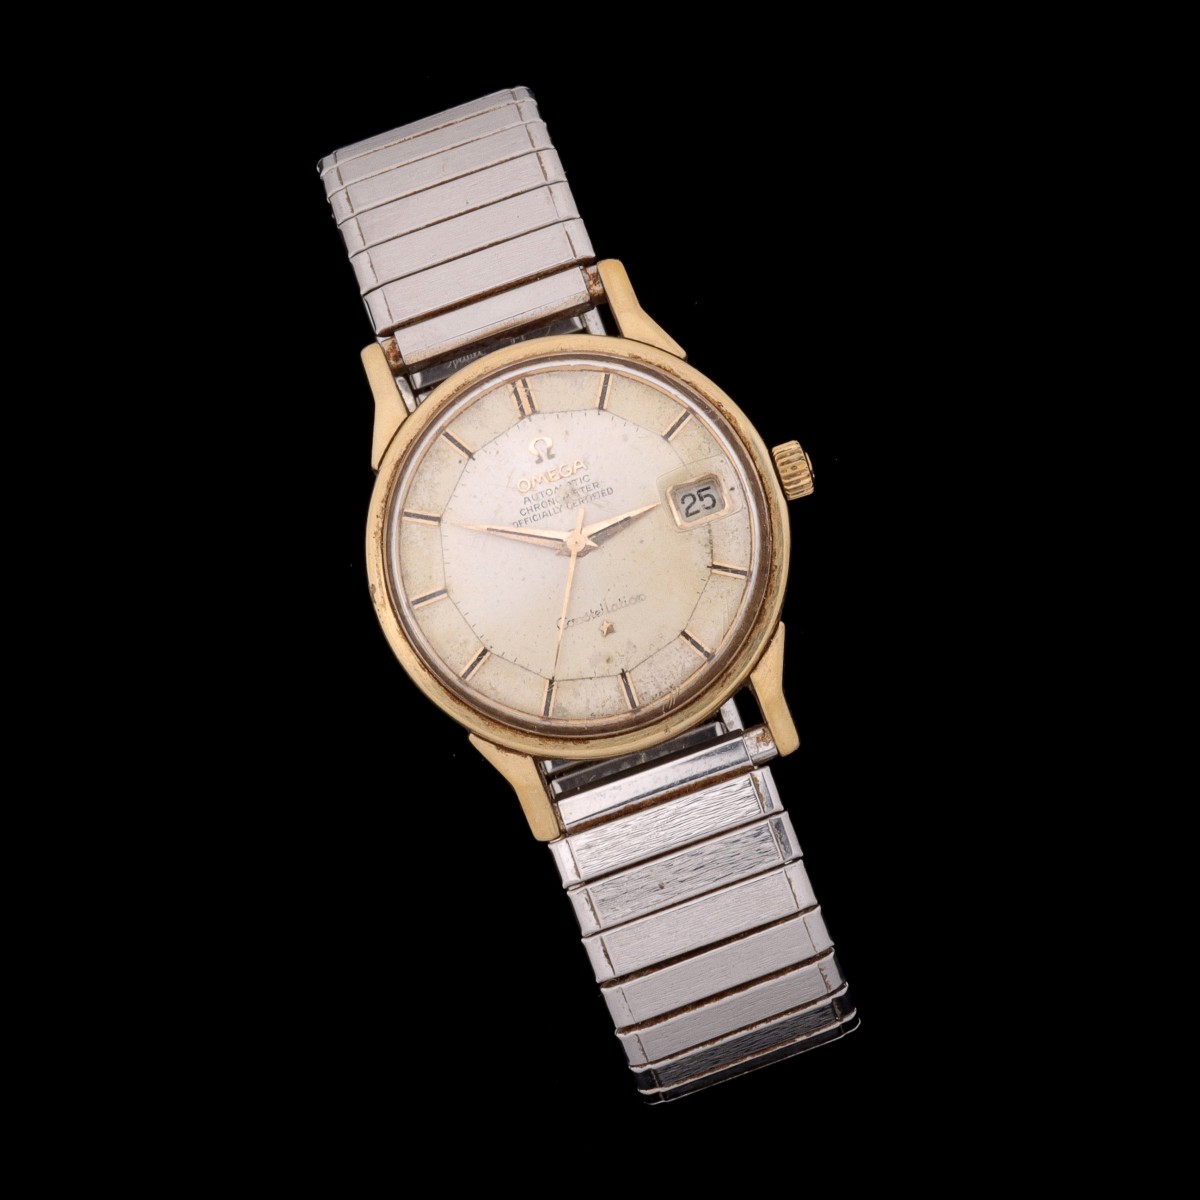 AN OMEGA CONSTELLATION OFFICIALLY CERTIFIED CHRONOMETER